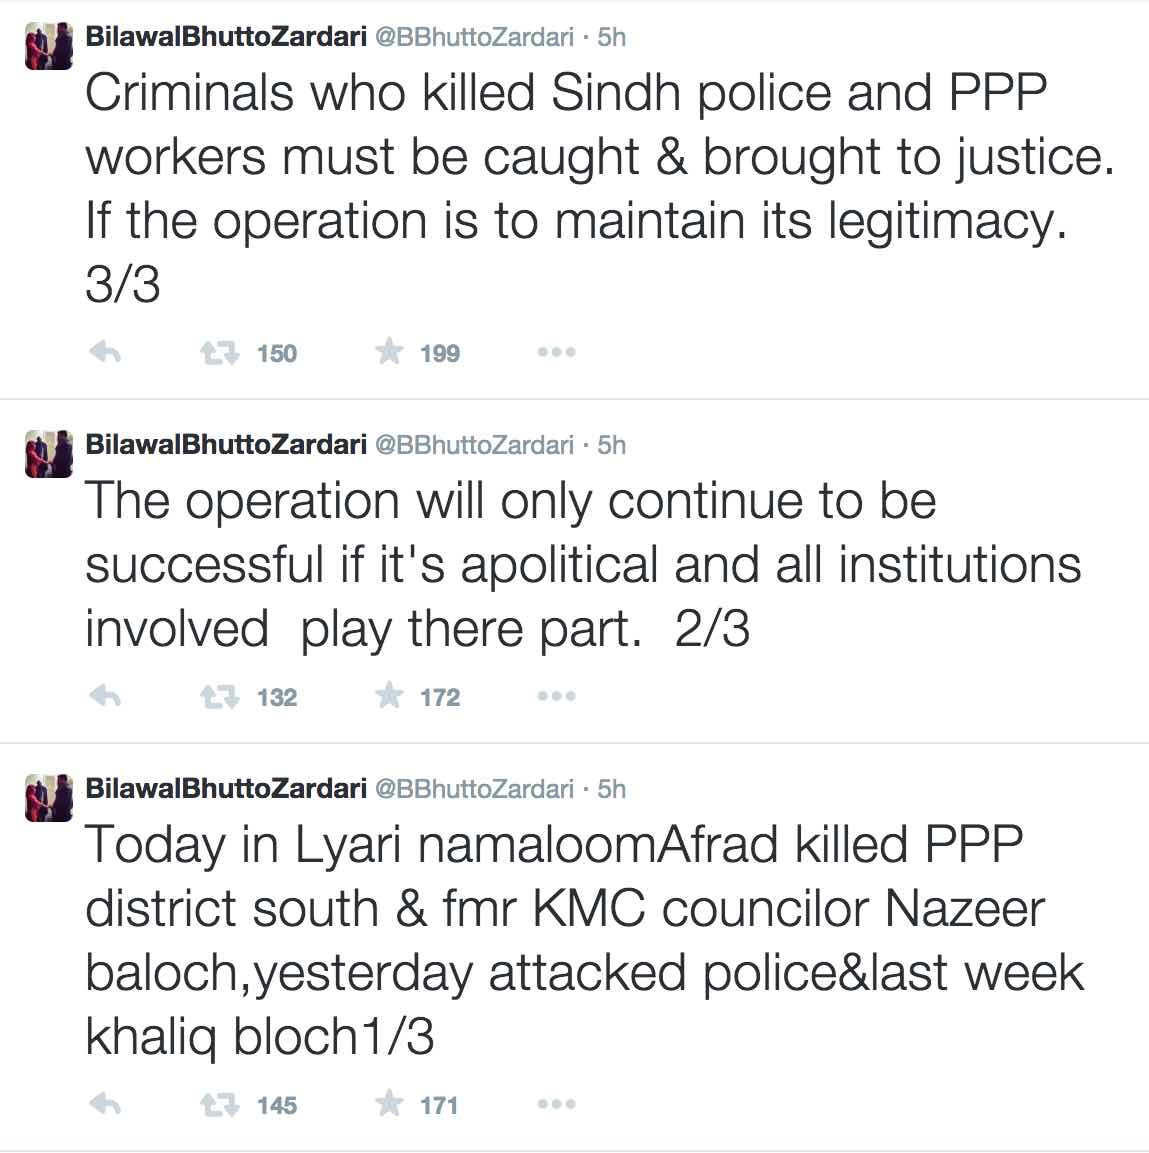 Bilawal Bhutto Tweets about Killing PPP Workers